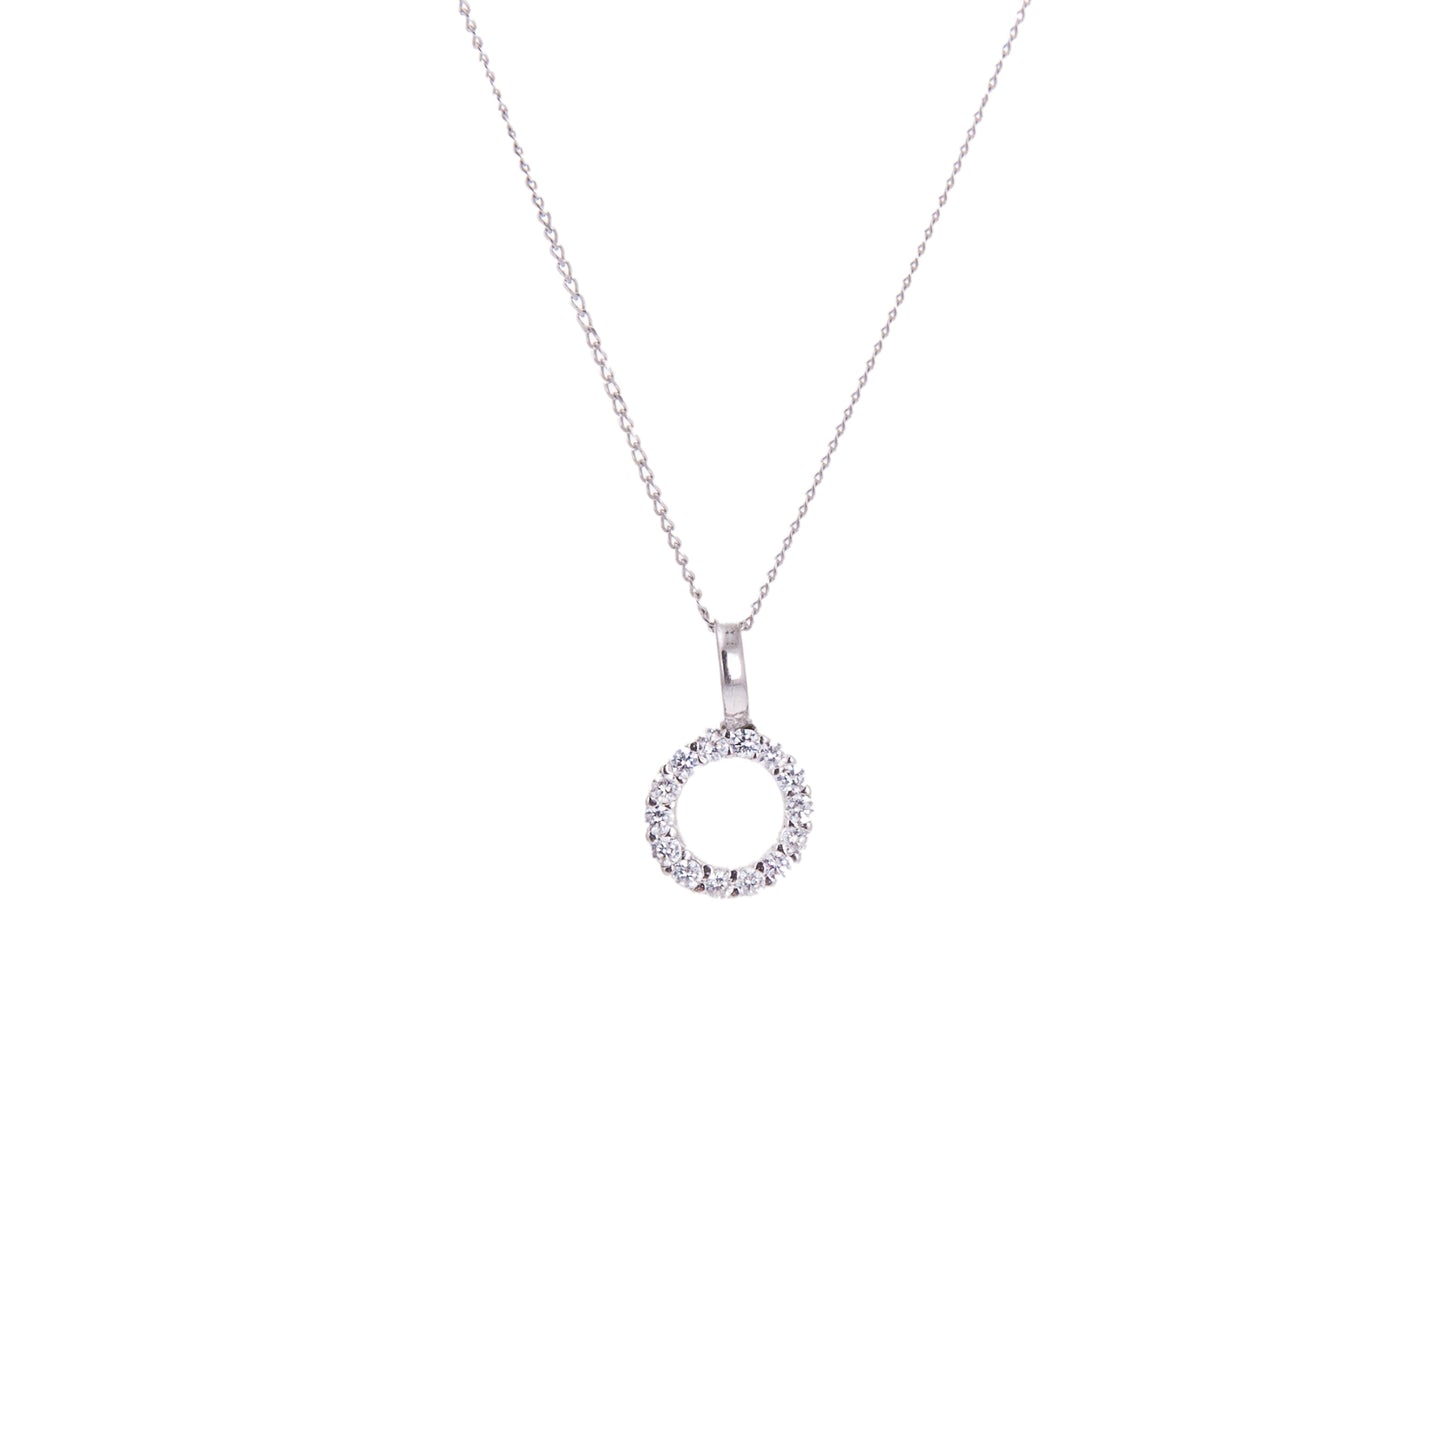 9ct White Gold CZ Karma Circle Necklace - 16 - 20 Inches